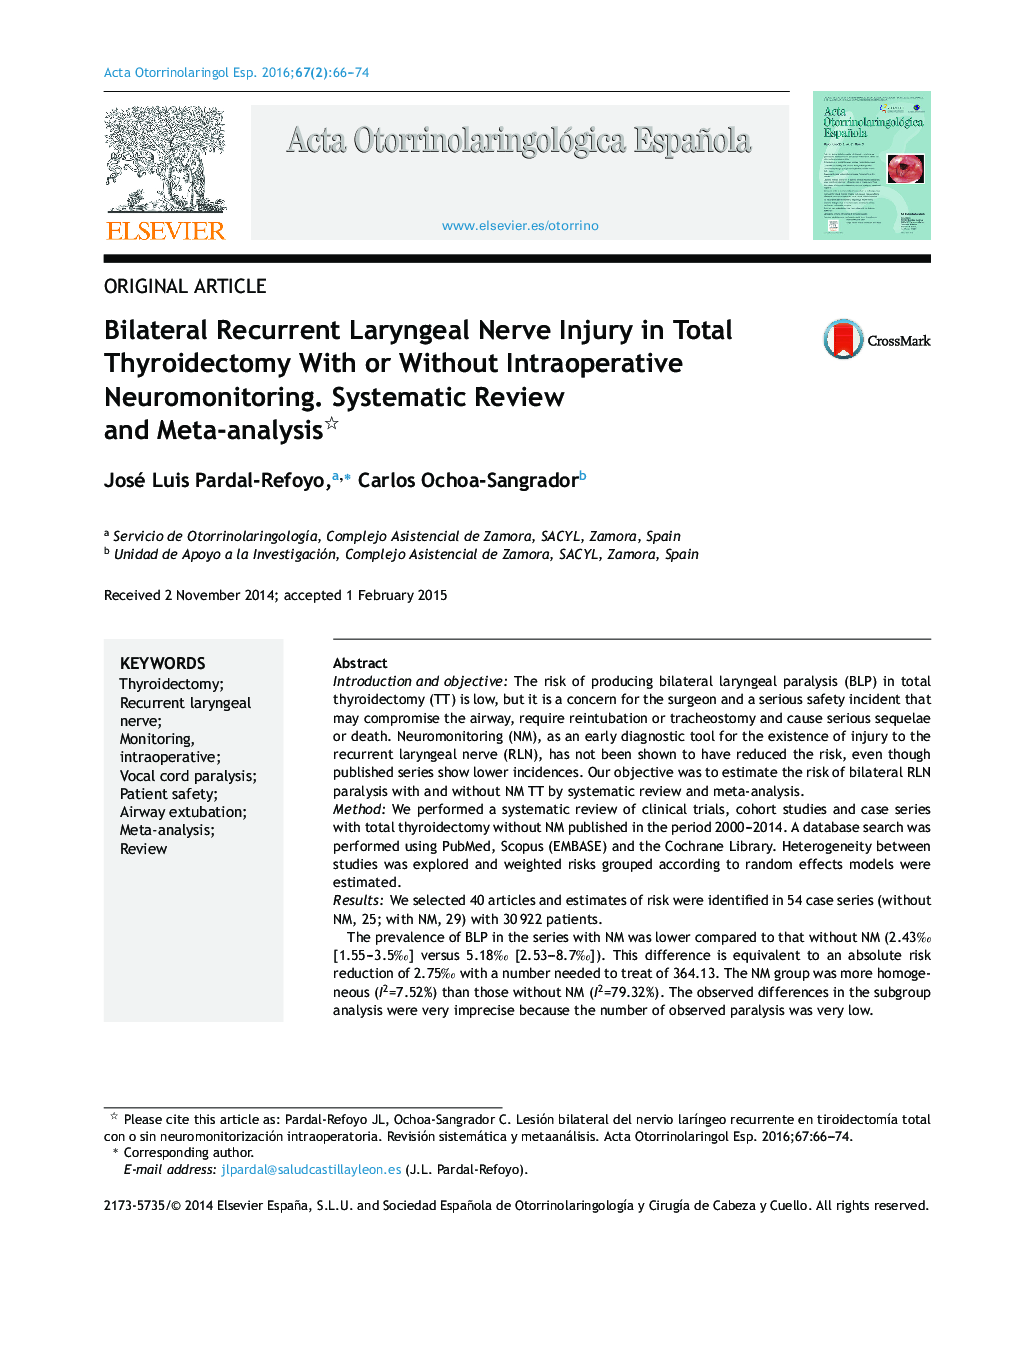 Bilateral Recurrent Laryngeal Nerve Injury in Total Thyroidectomy With or Without Intraoperative Neuromonitoring. Systematic Review and Meta-analysis 